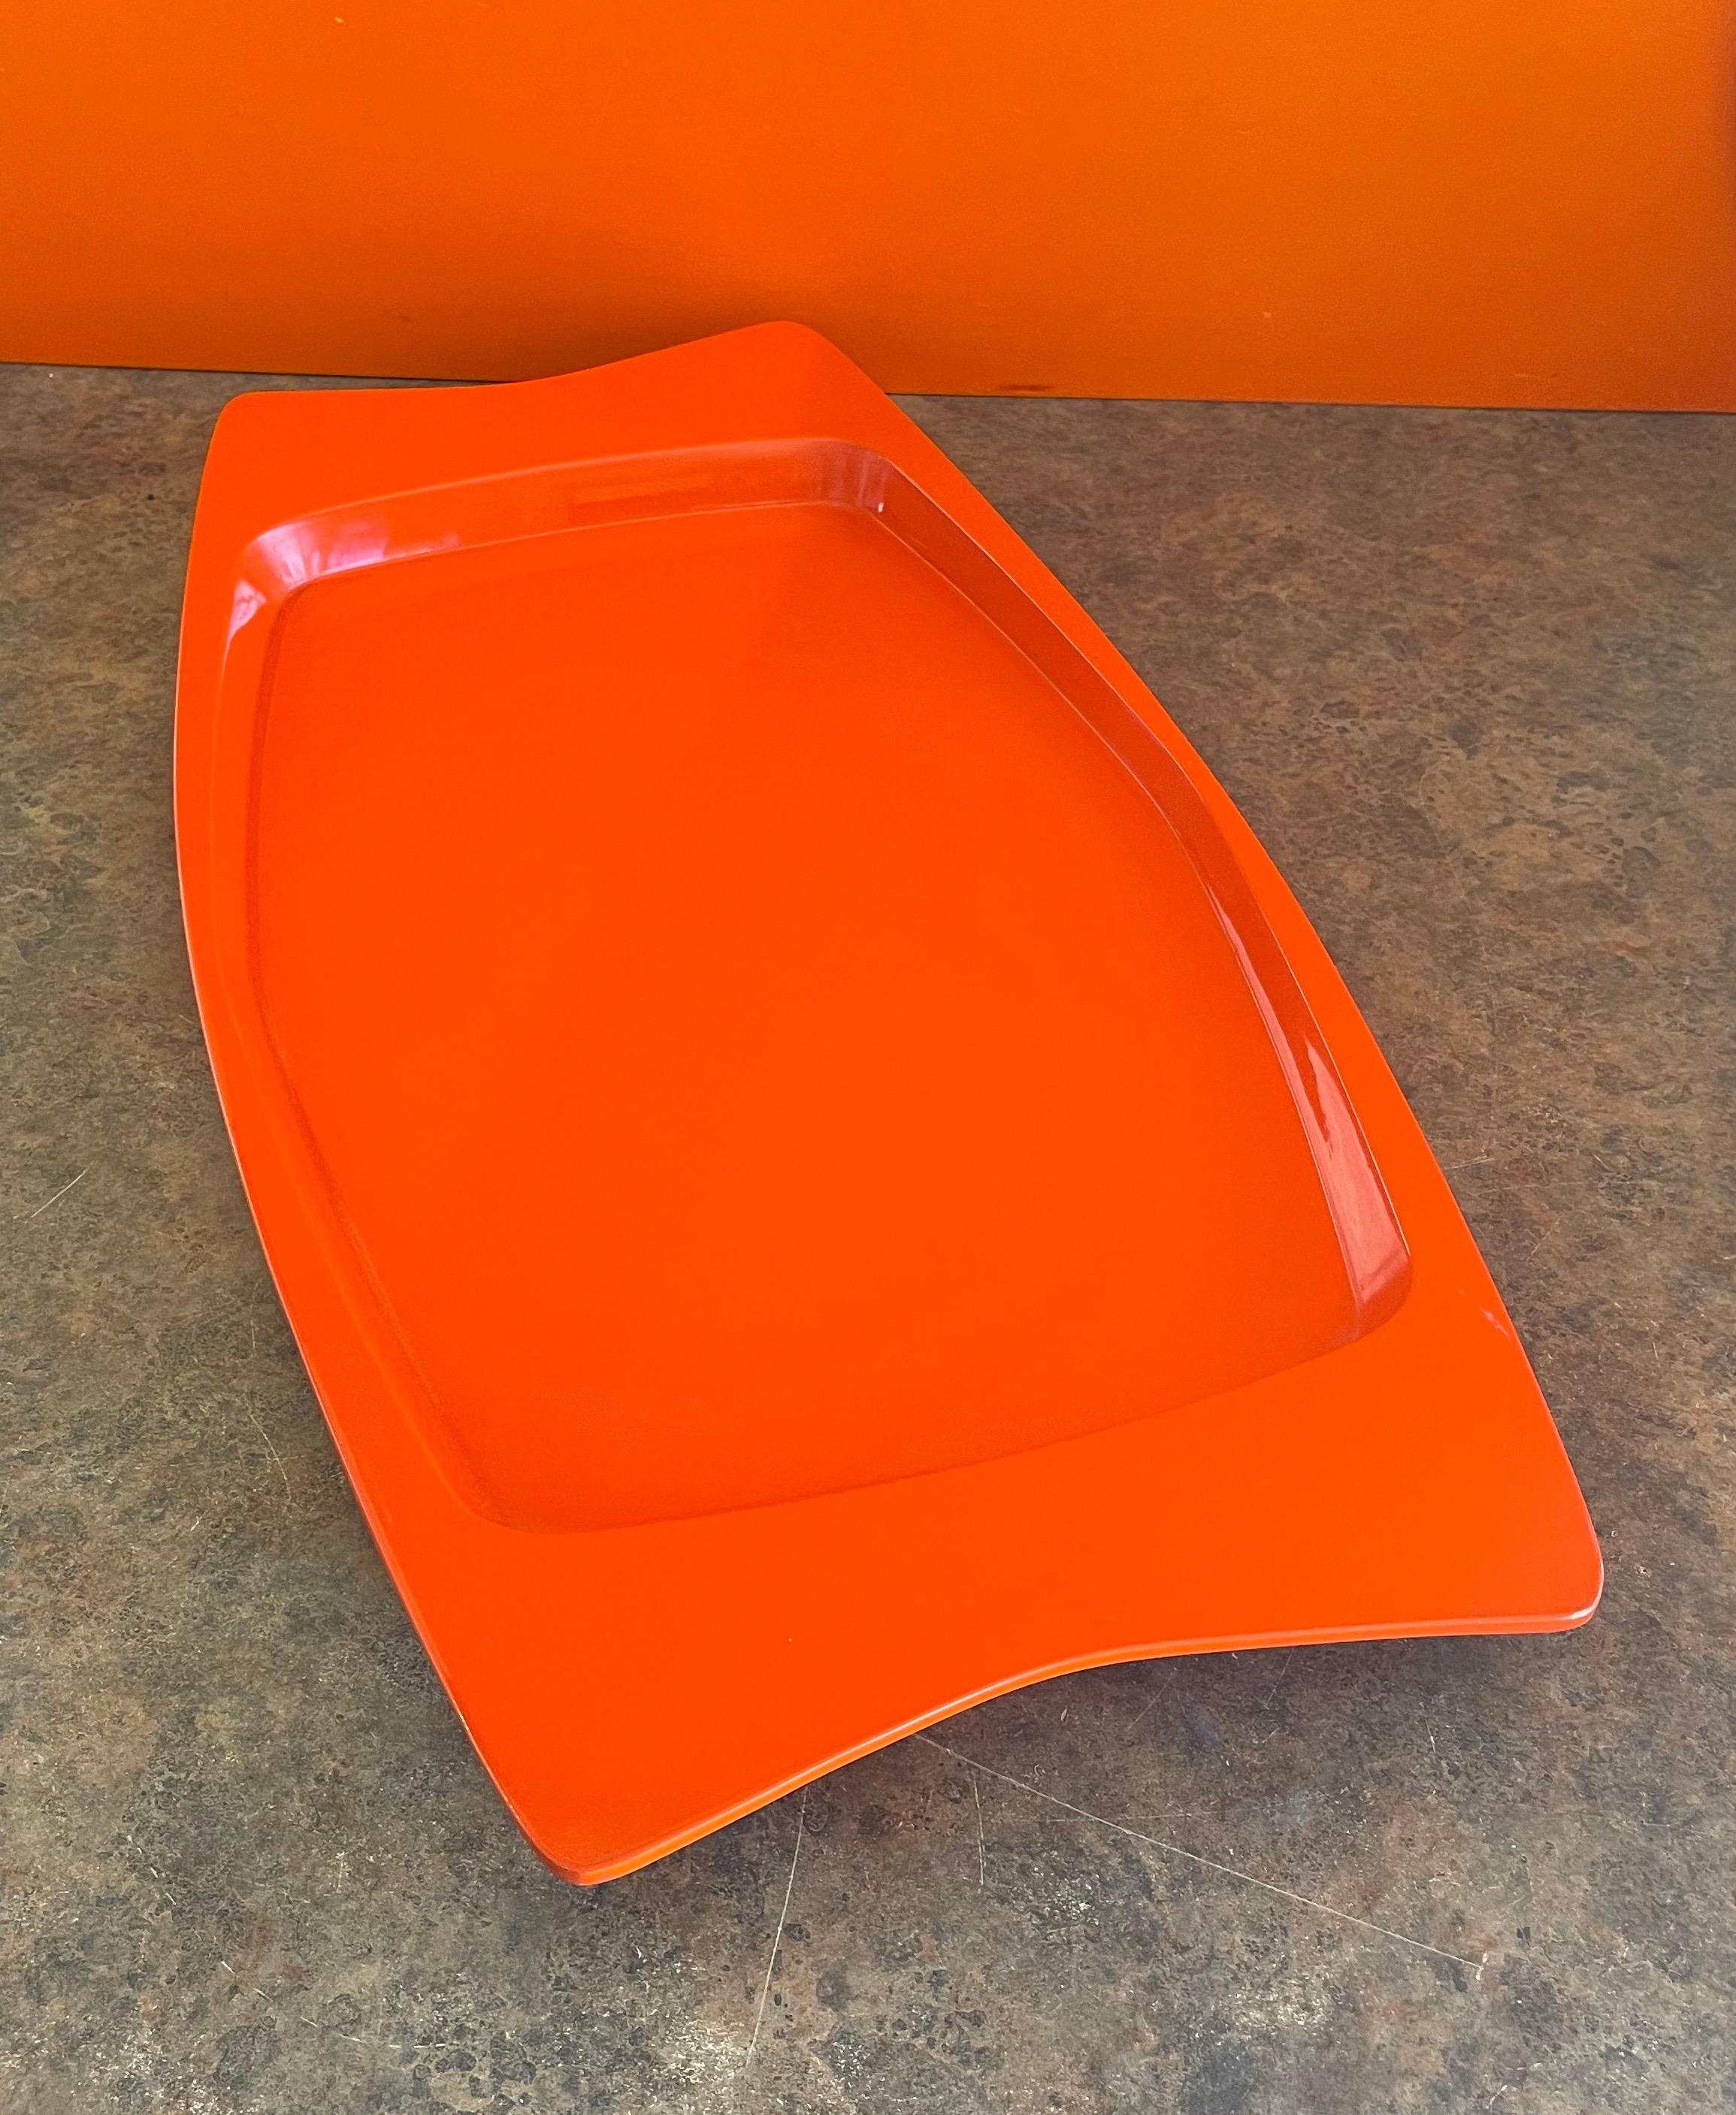 Scandinavian Modern Extra Large Orange Lacquer Tray by Jens Quistgaard for Dansk- Early Production